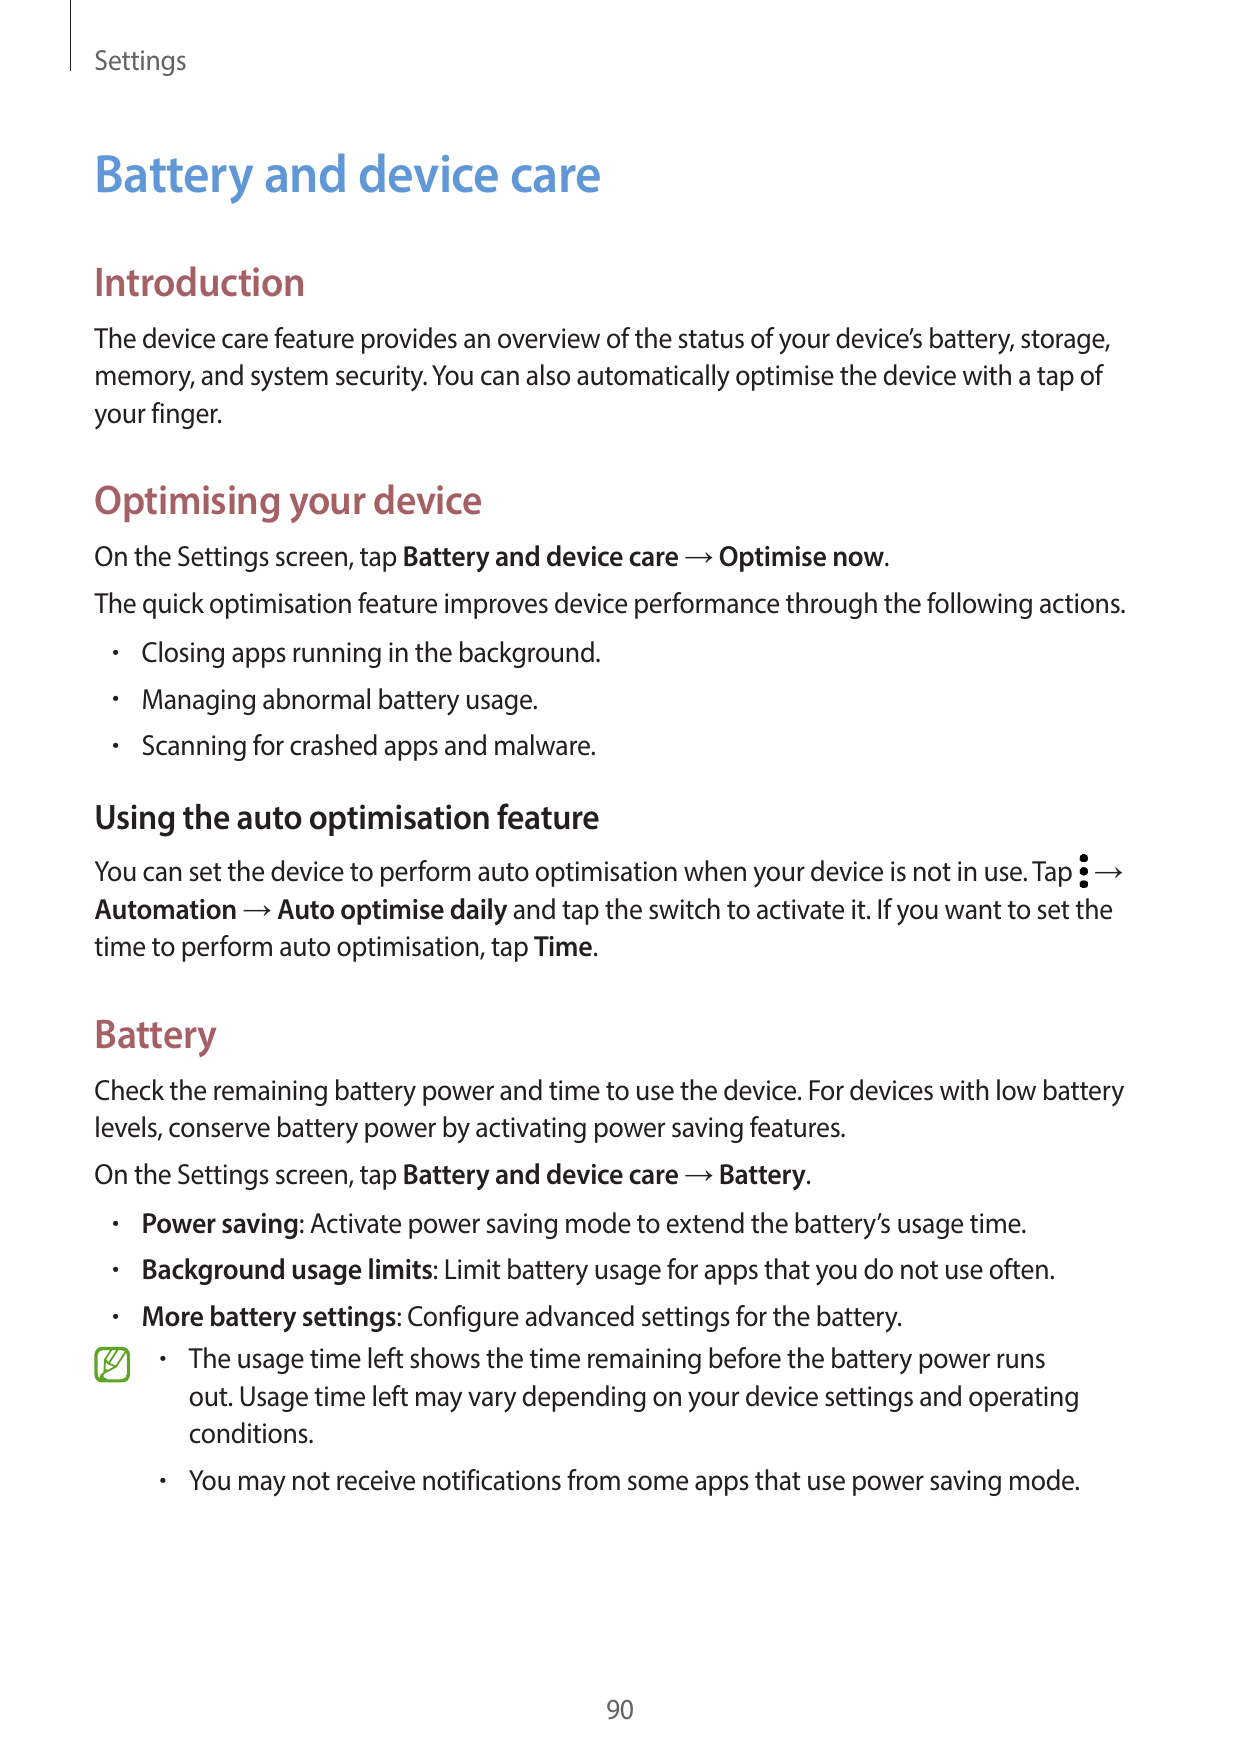 SettingsBattery and device careIntroductionThe device care feature provides an overview of the status of your device’s battery, 